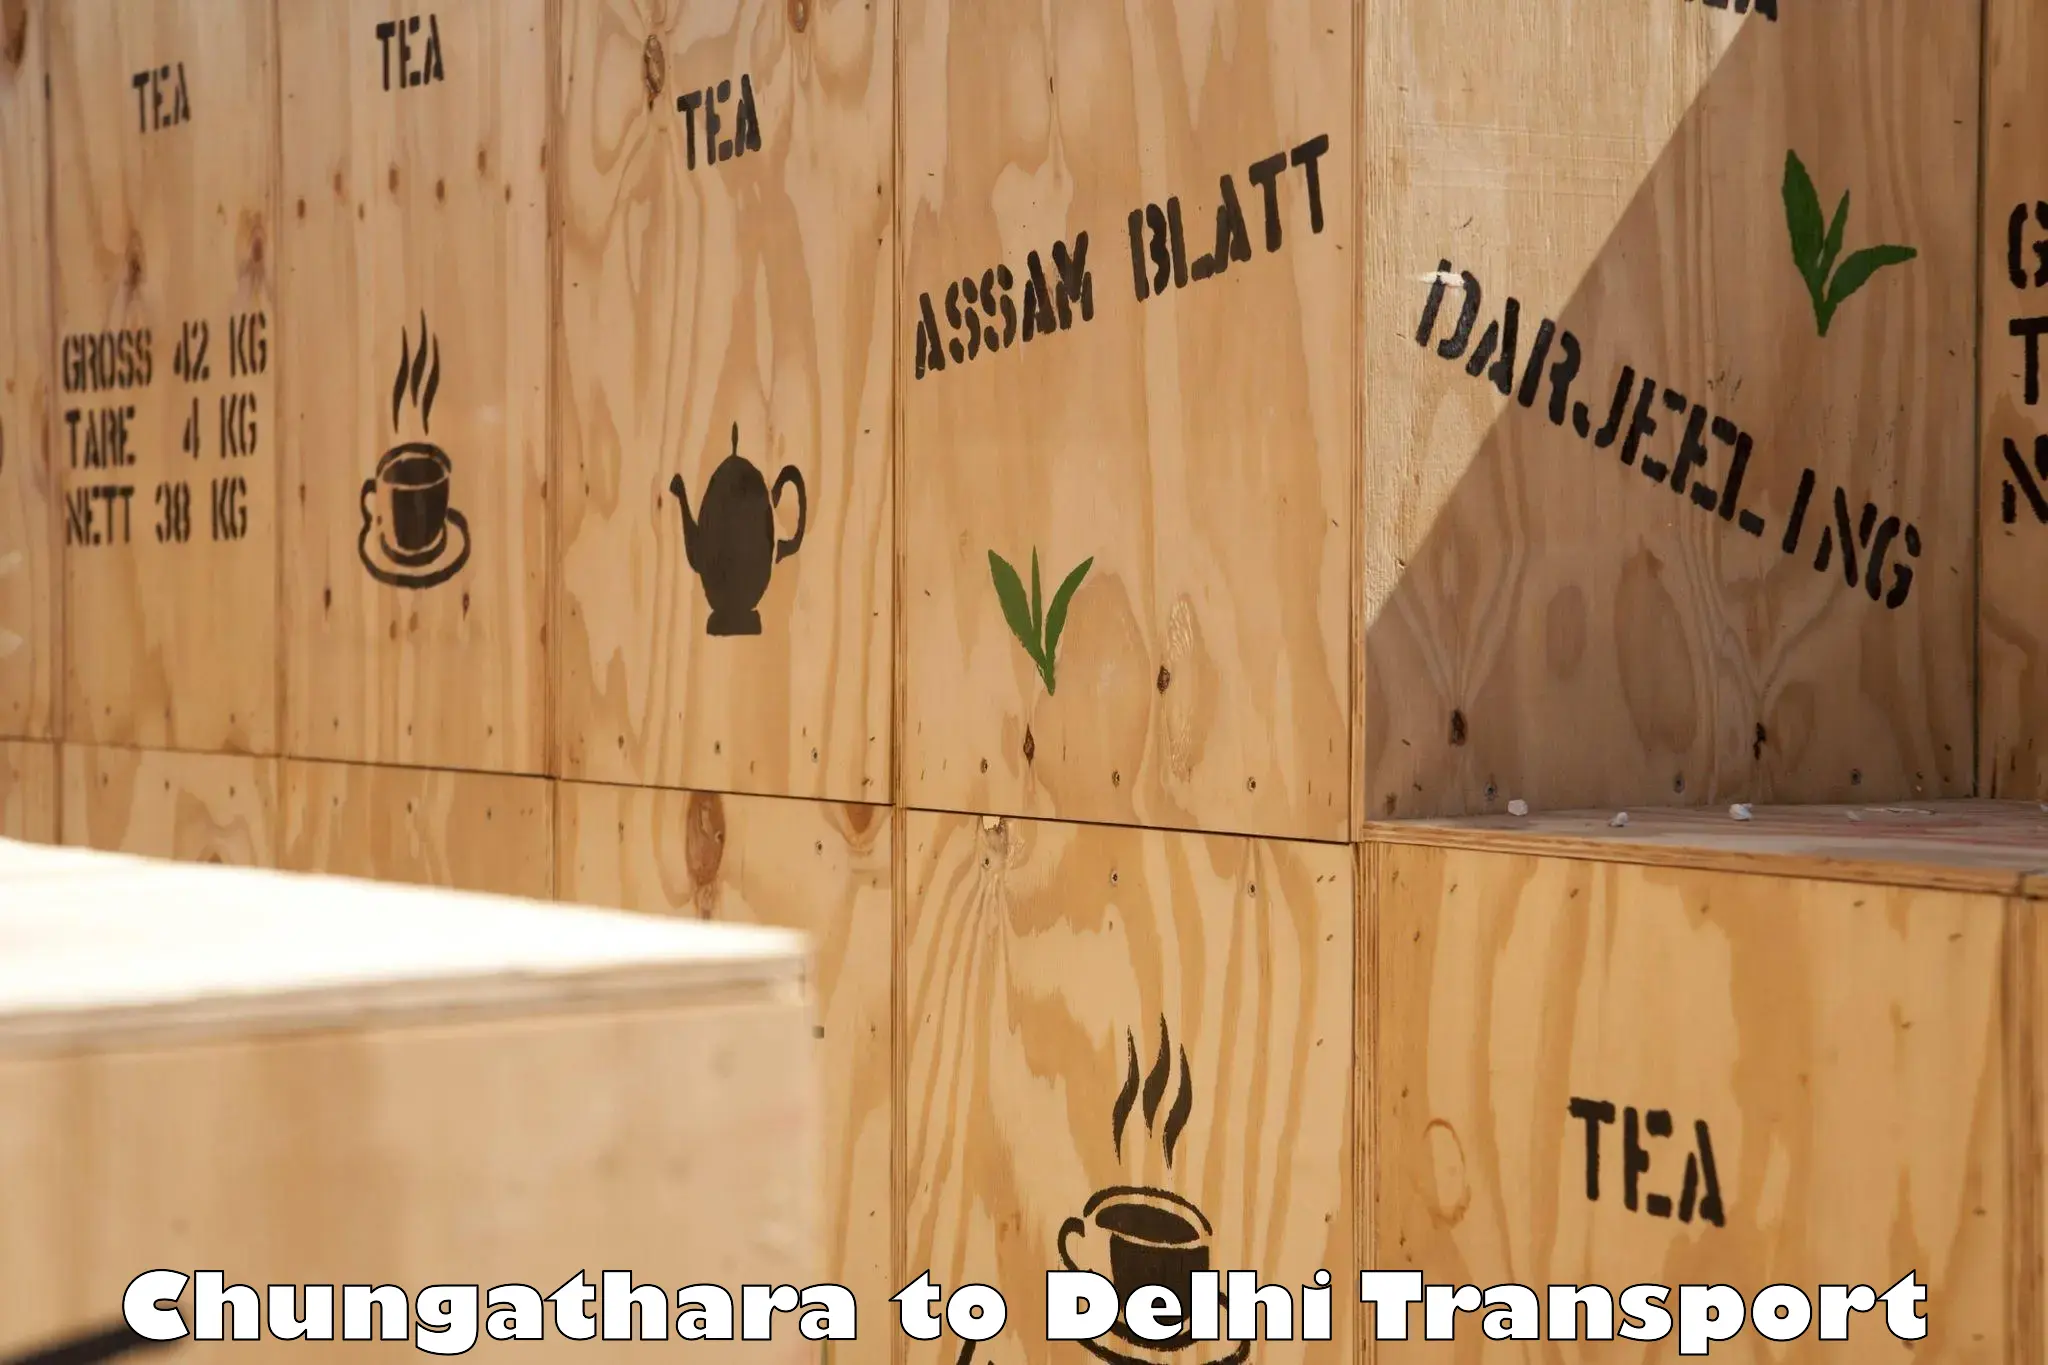 Air freight transport services in Chungathara to Delhi